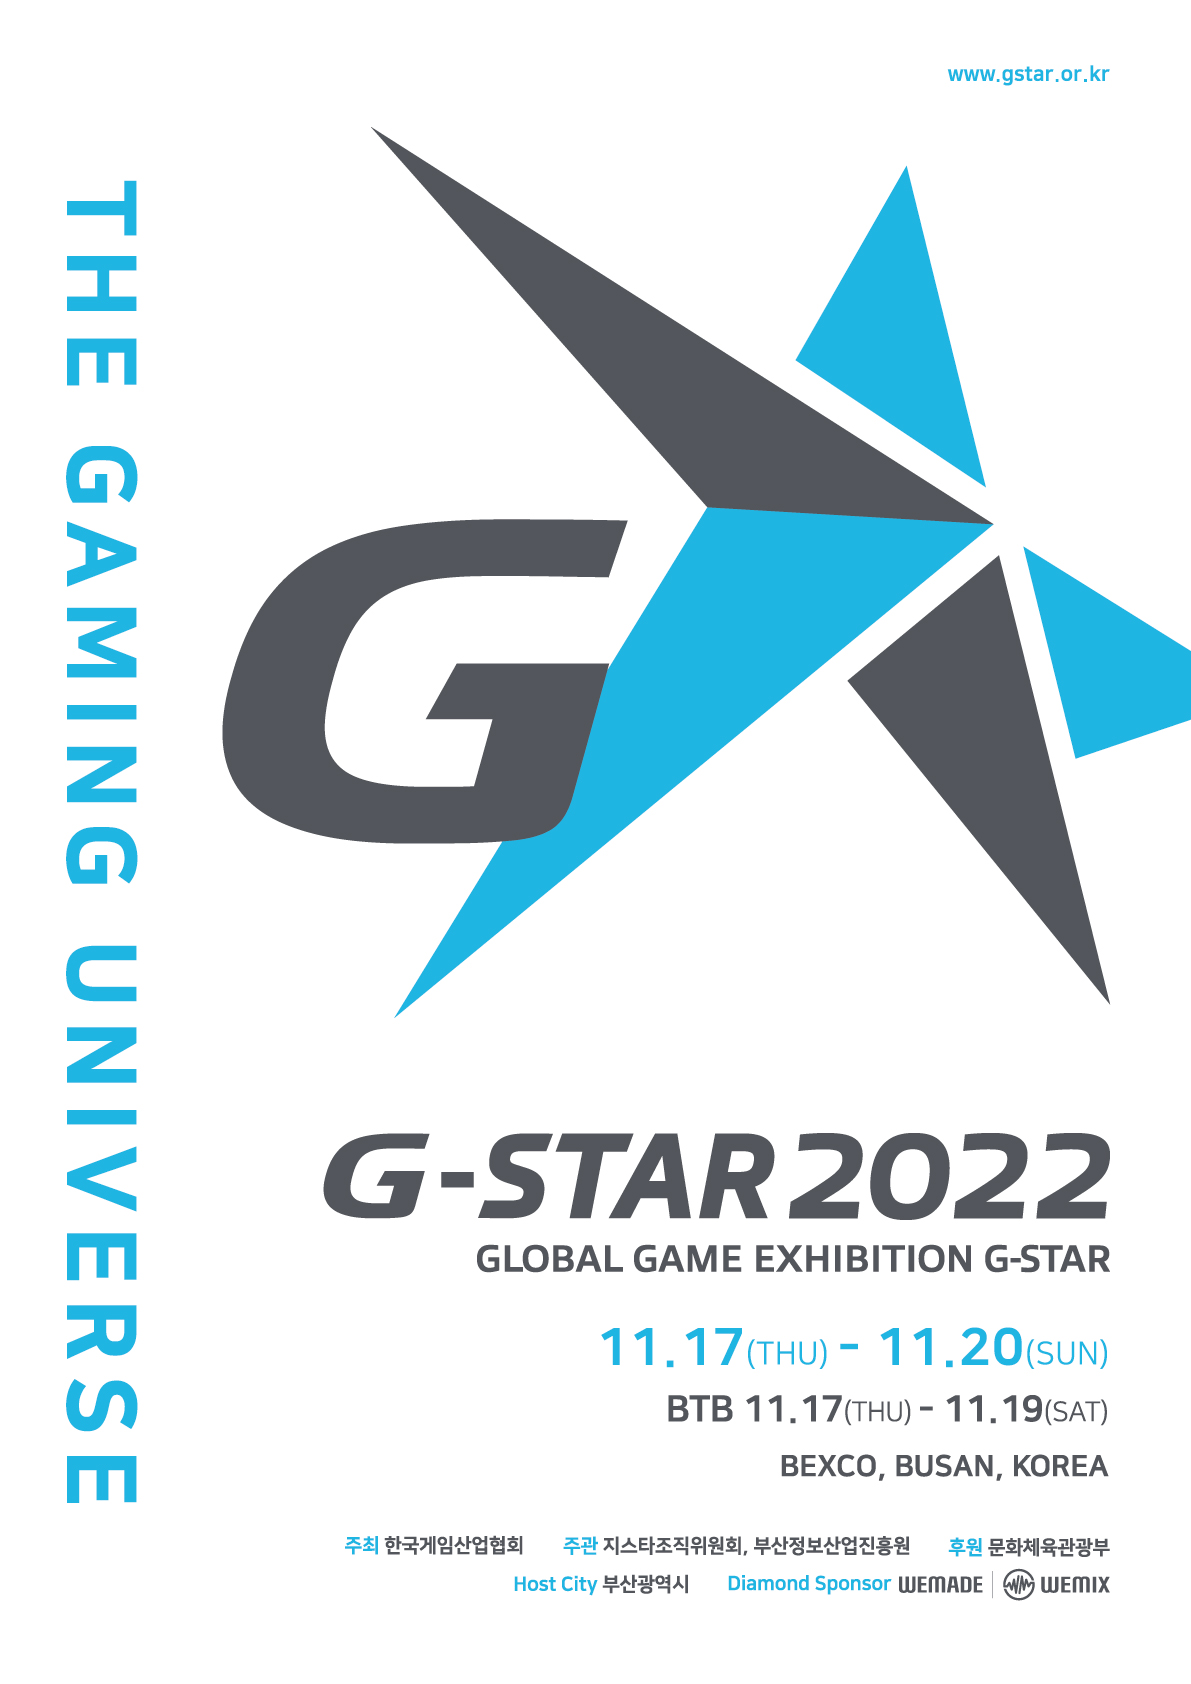 Global Game Exhibition G-STAR 2022